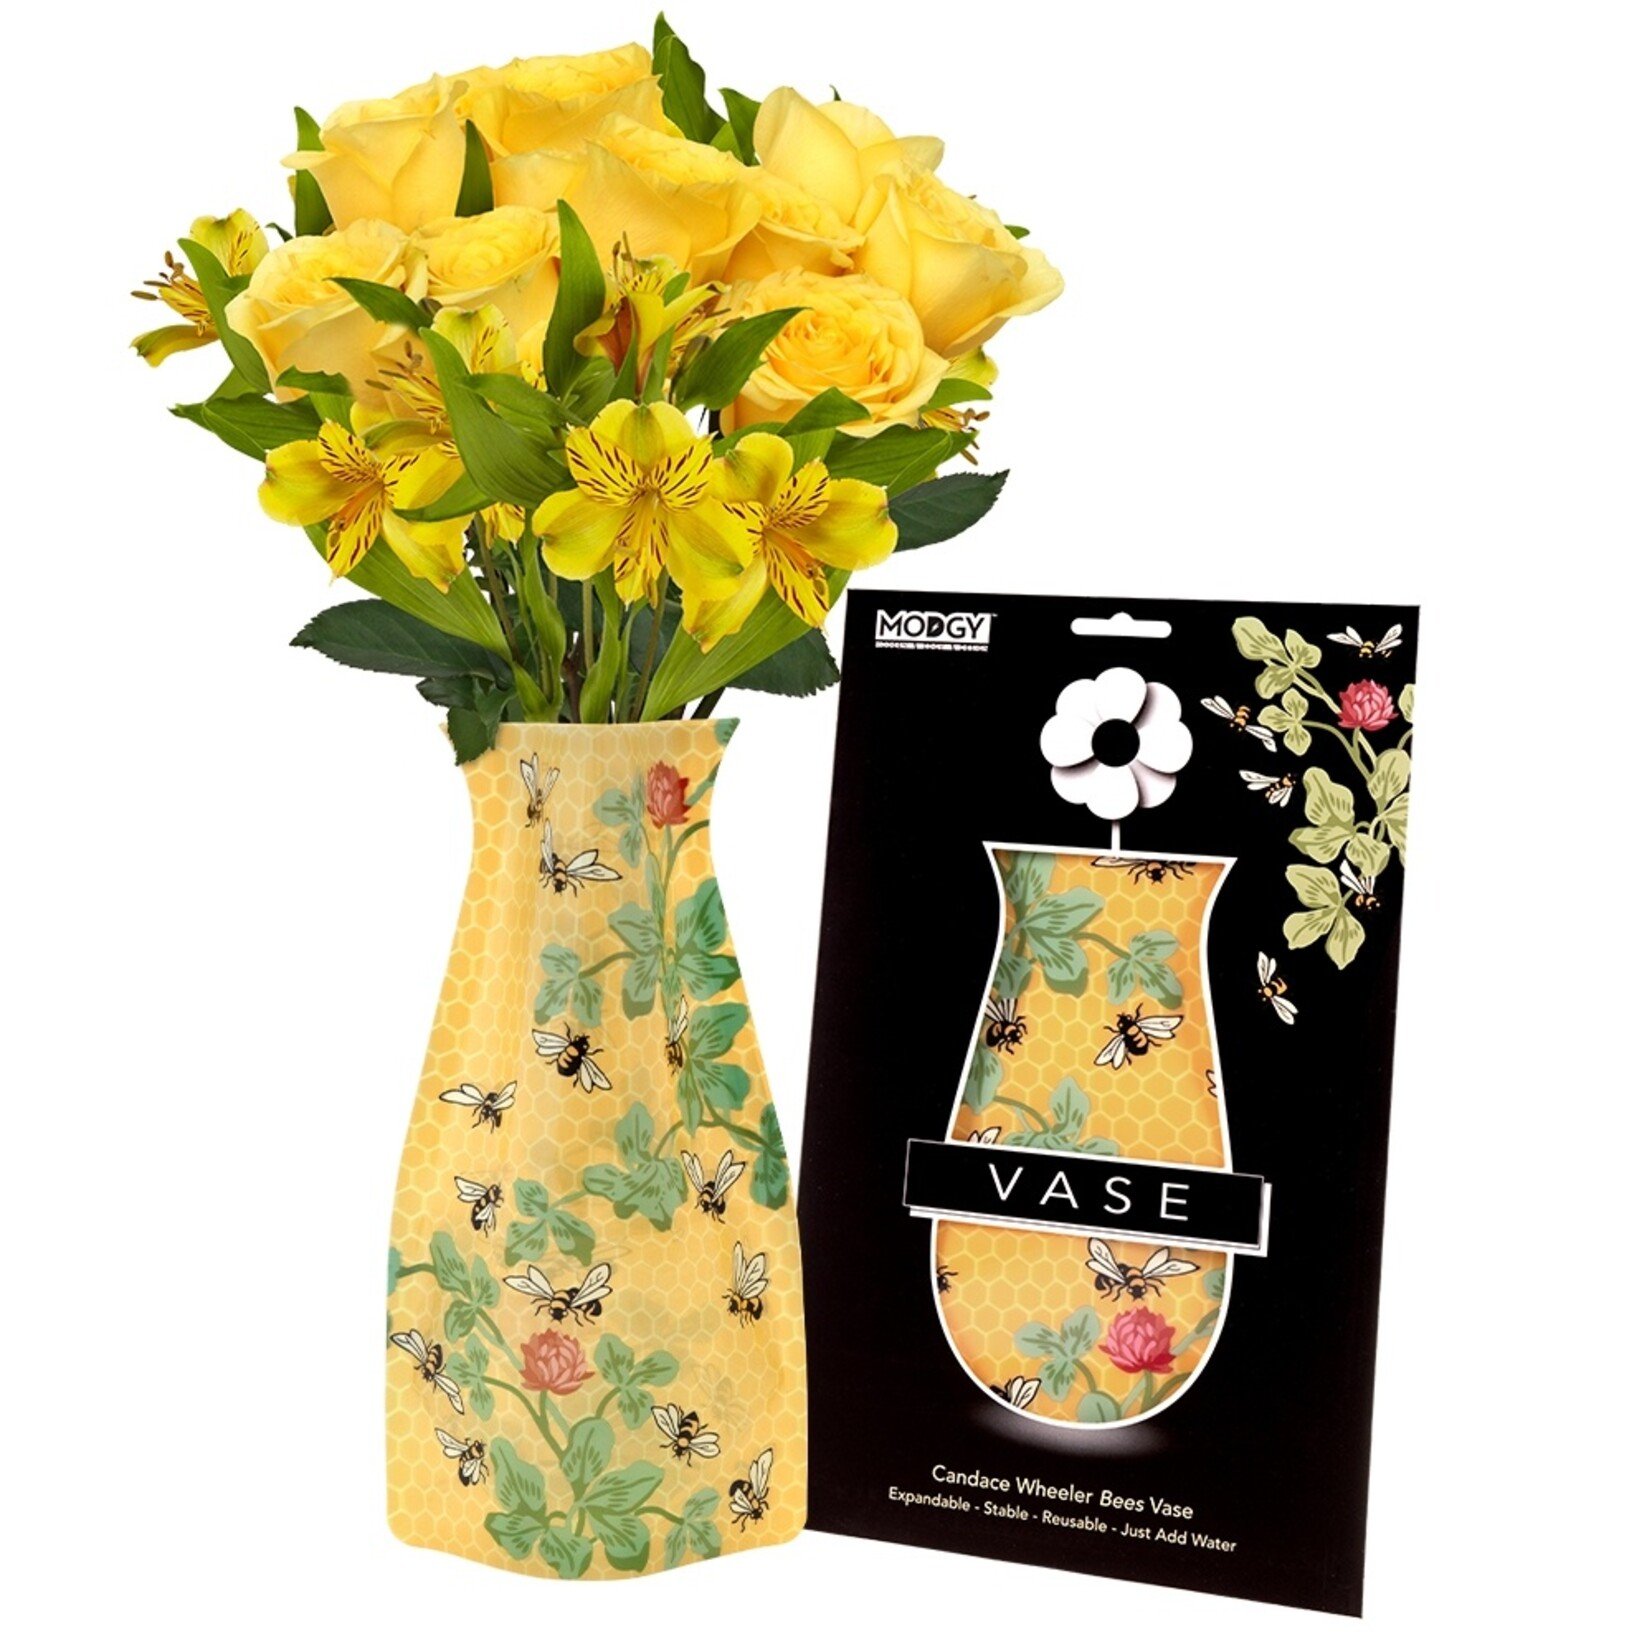 Modgy Modgy Bees with Honeycomb Vase